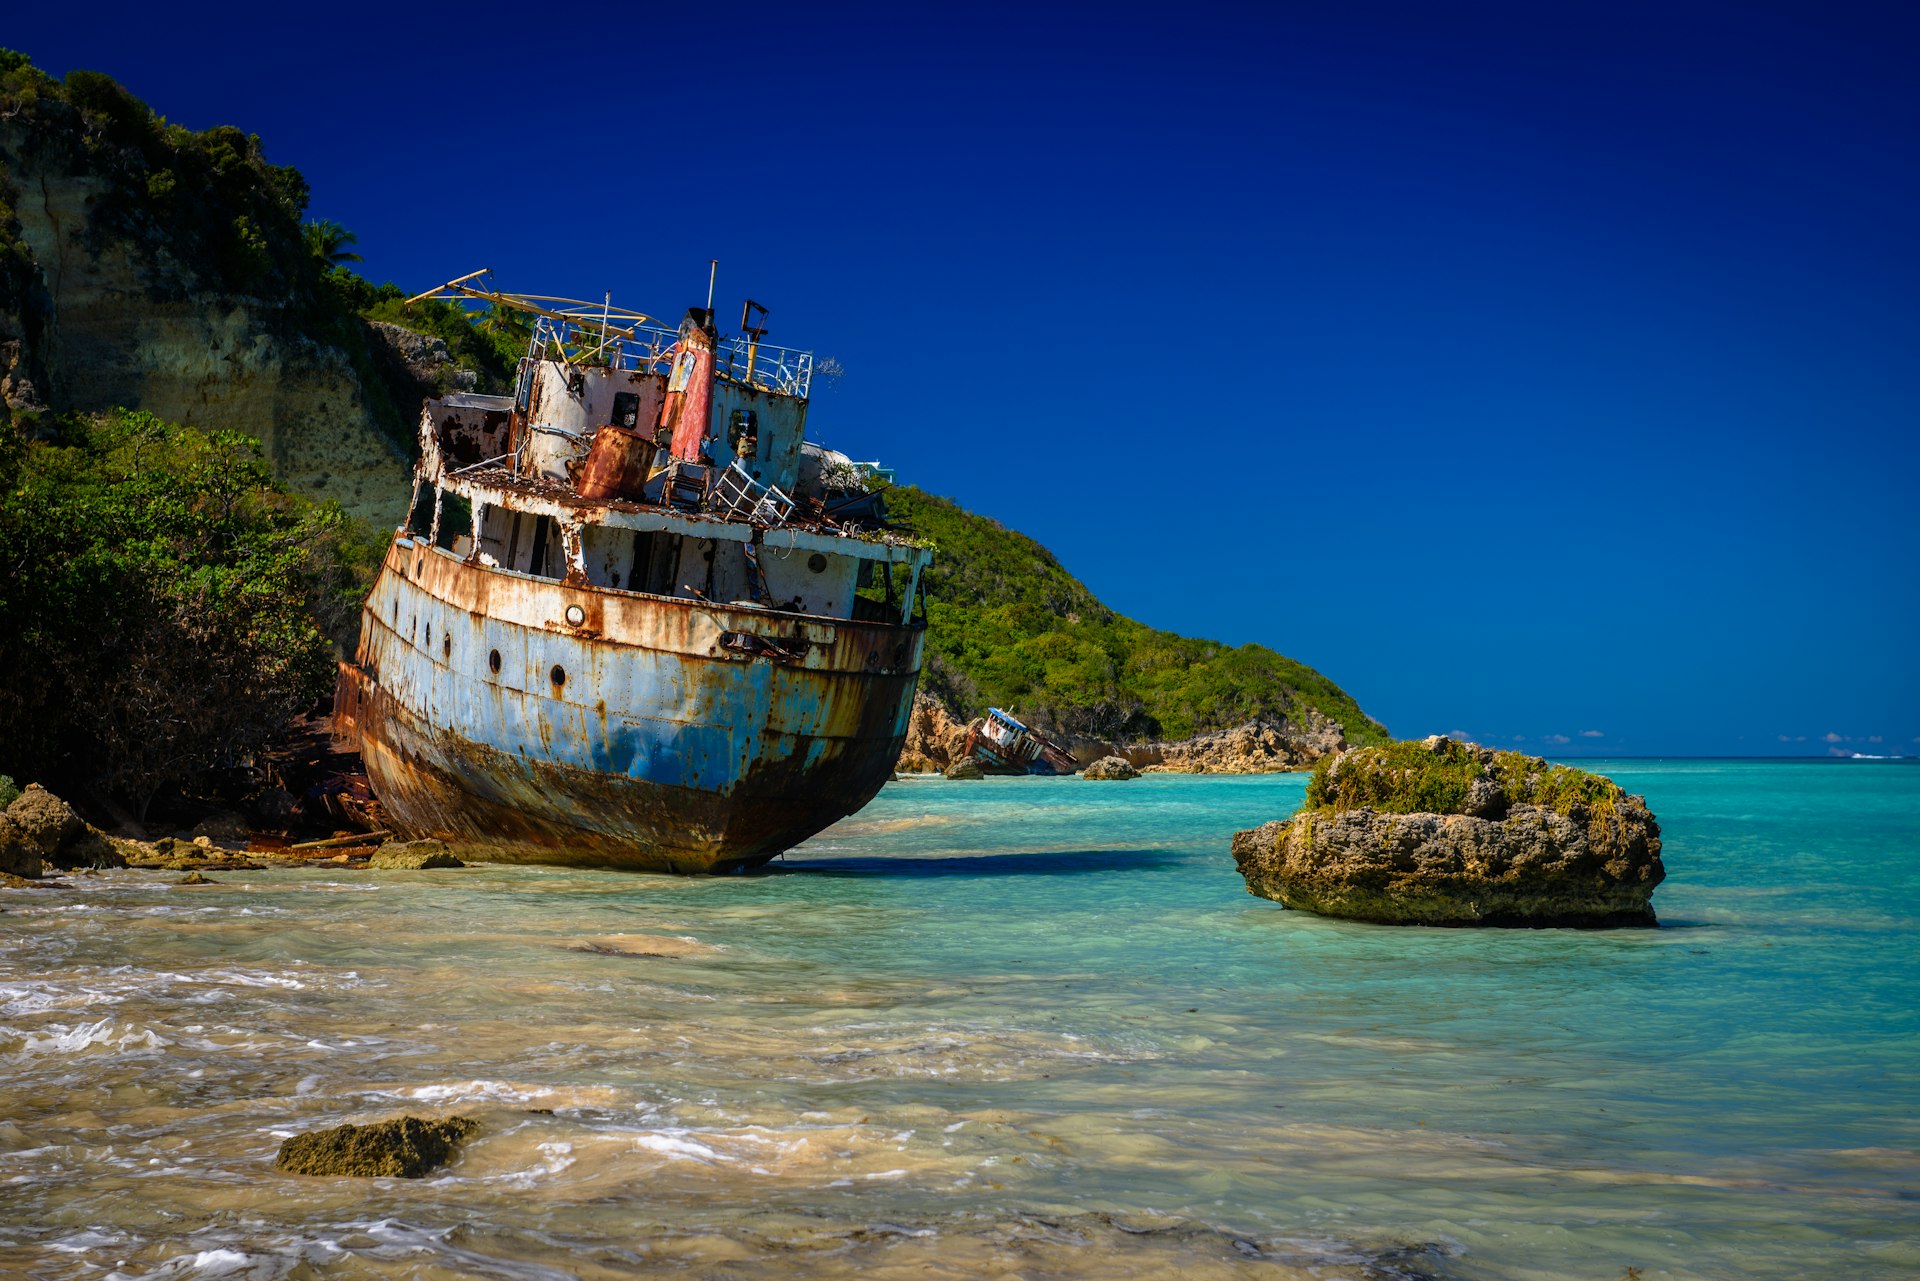 Shipwrecks in ruins on the shores of Sandy Ground Beach on the island of Anguilla